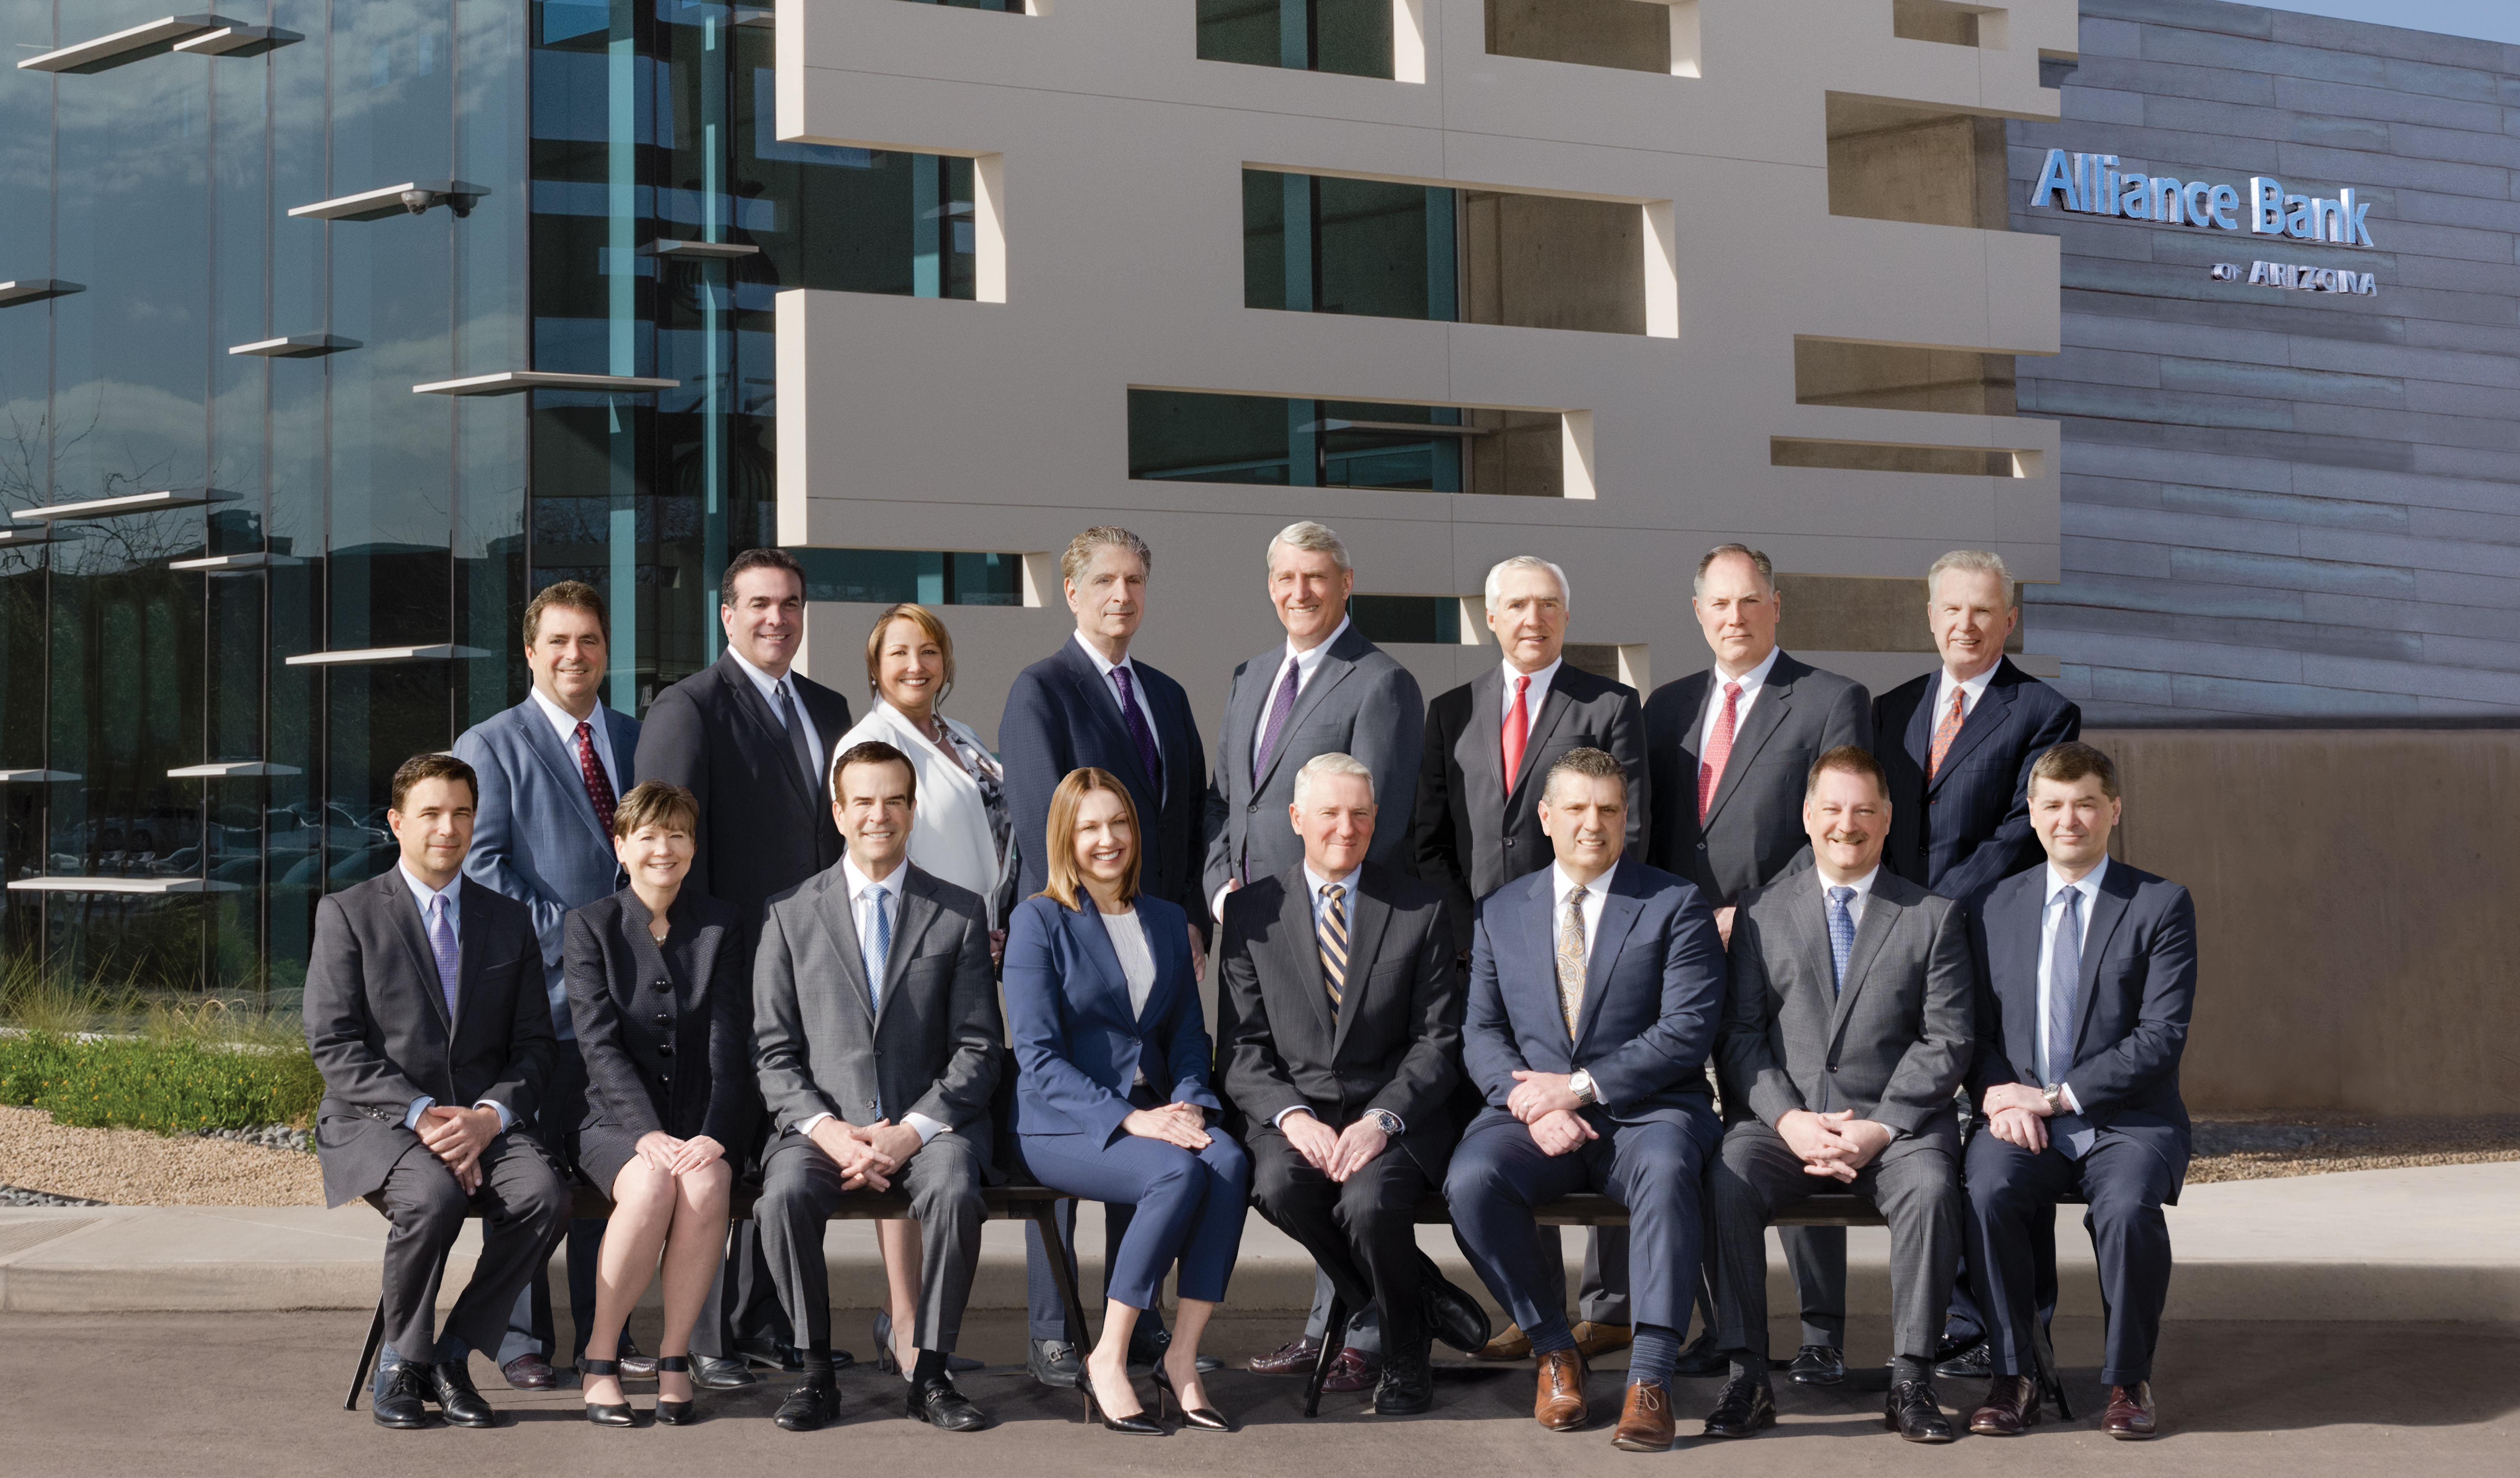 Group photo of staff - Western Alliance Bancorporation 2017 Annual Report